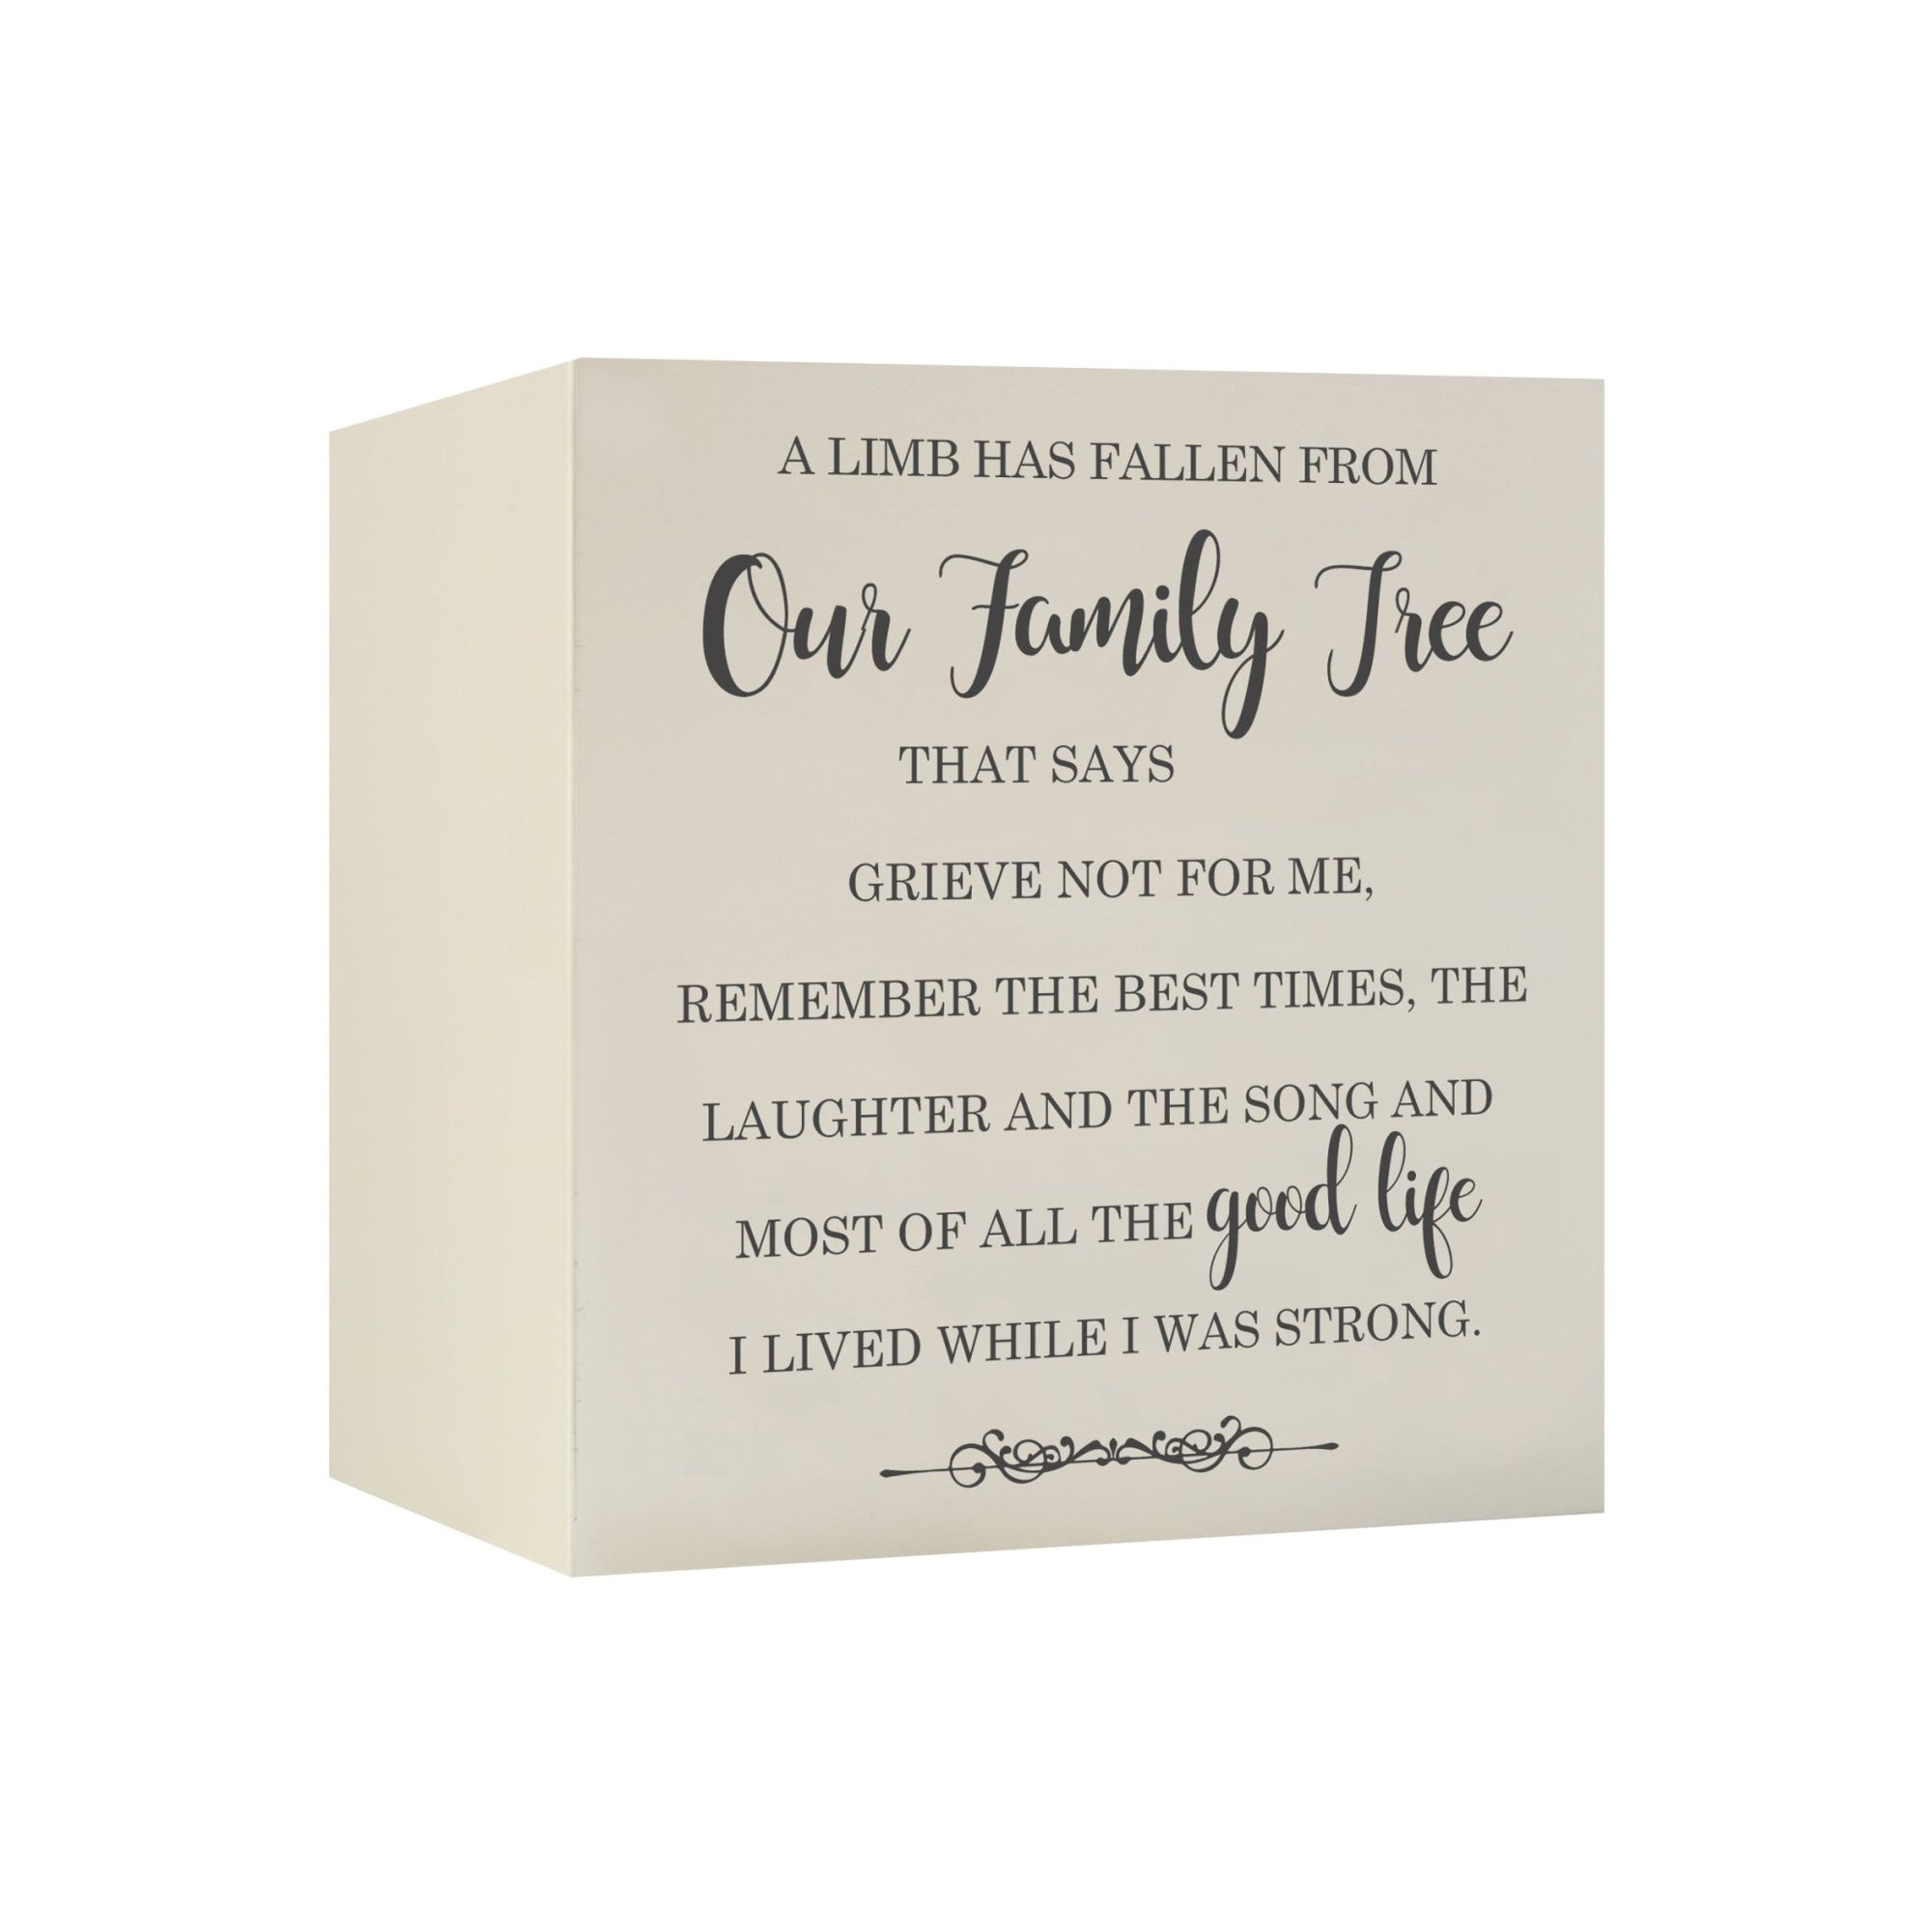 Memorial Bereavement Keepsake Cremation Shadow Box and Urn 6x6in Holds 53 Cu Inches Of Human Ashes A Limb Has Fallen - LifeSong Milestones